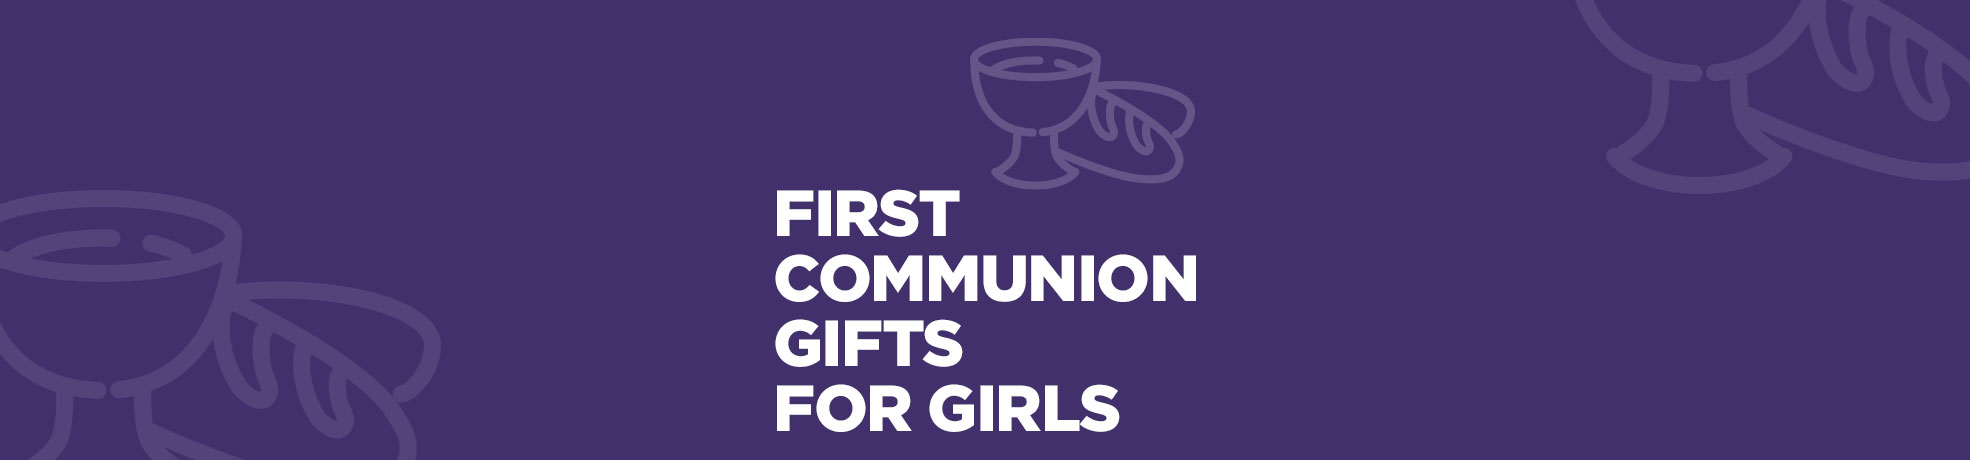 First Communion Gift Ideas for Girls